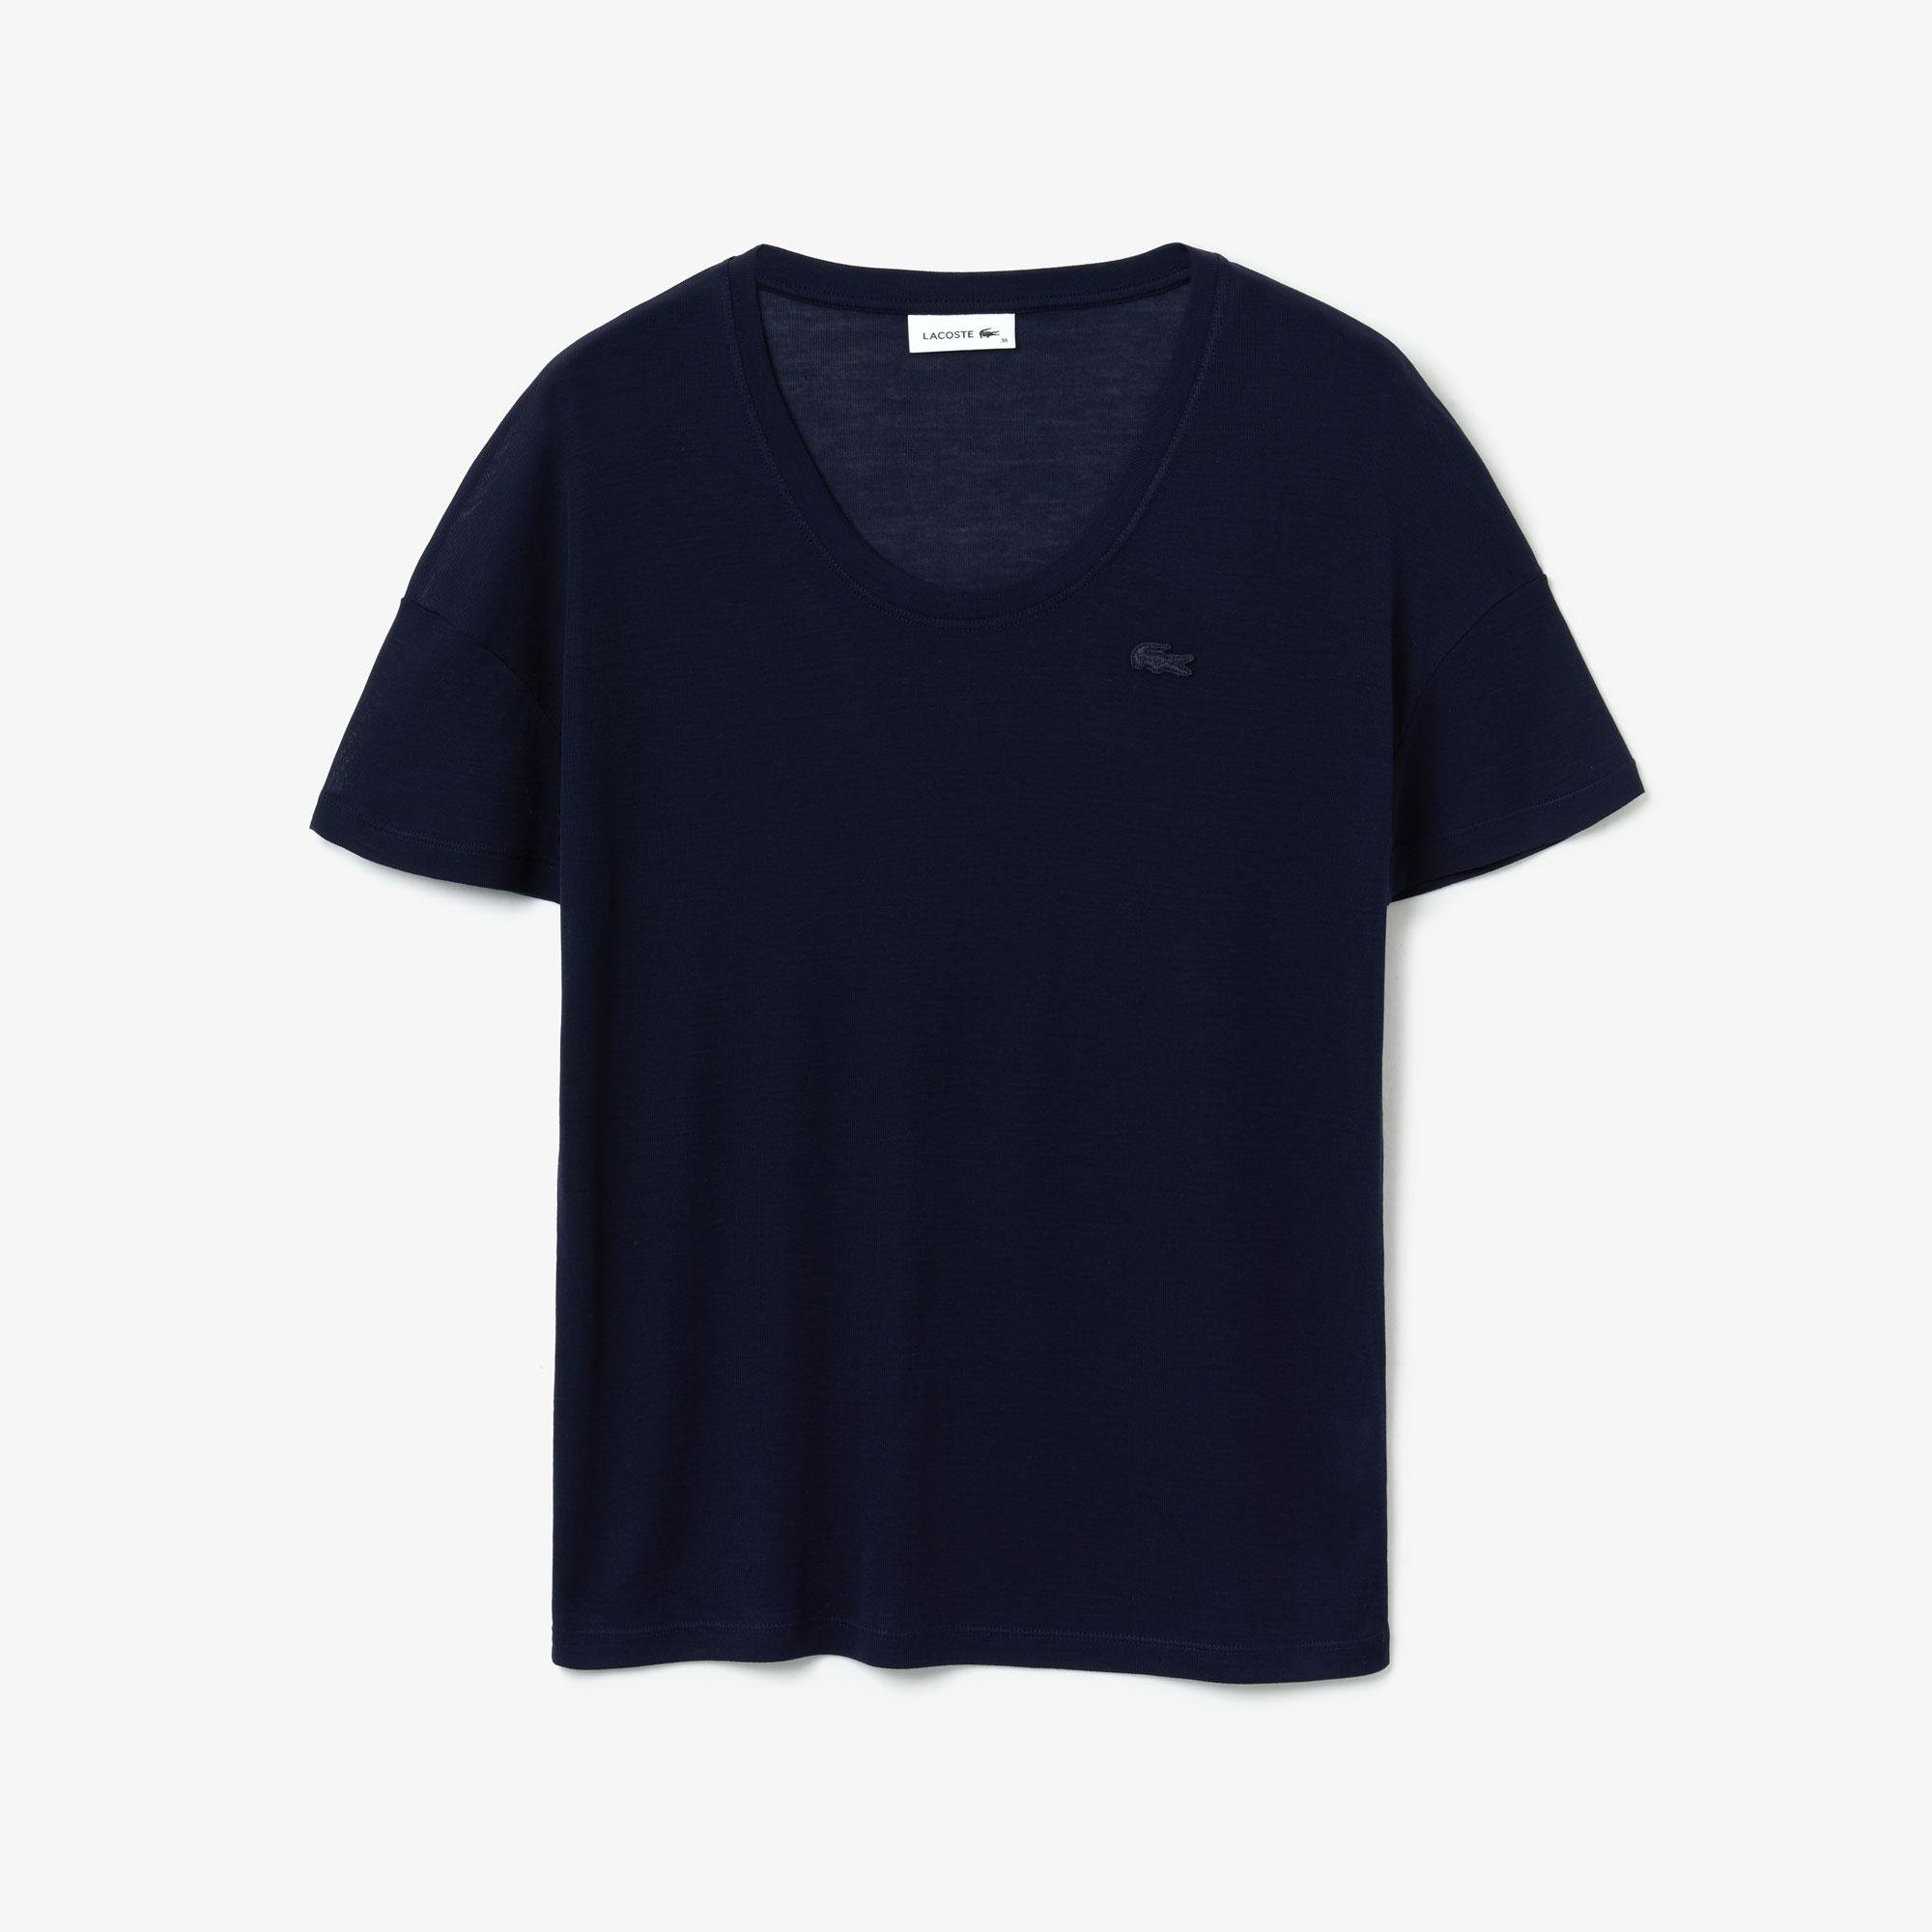 Lacoste Women's Motion Lightweight Ribbed Lyocell T-Shirt